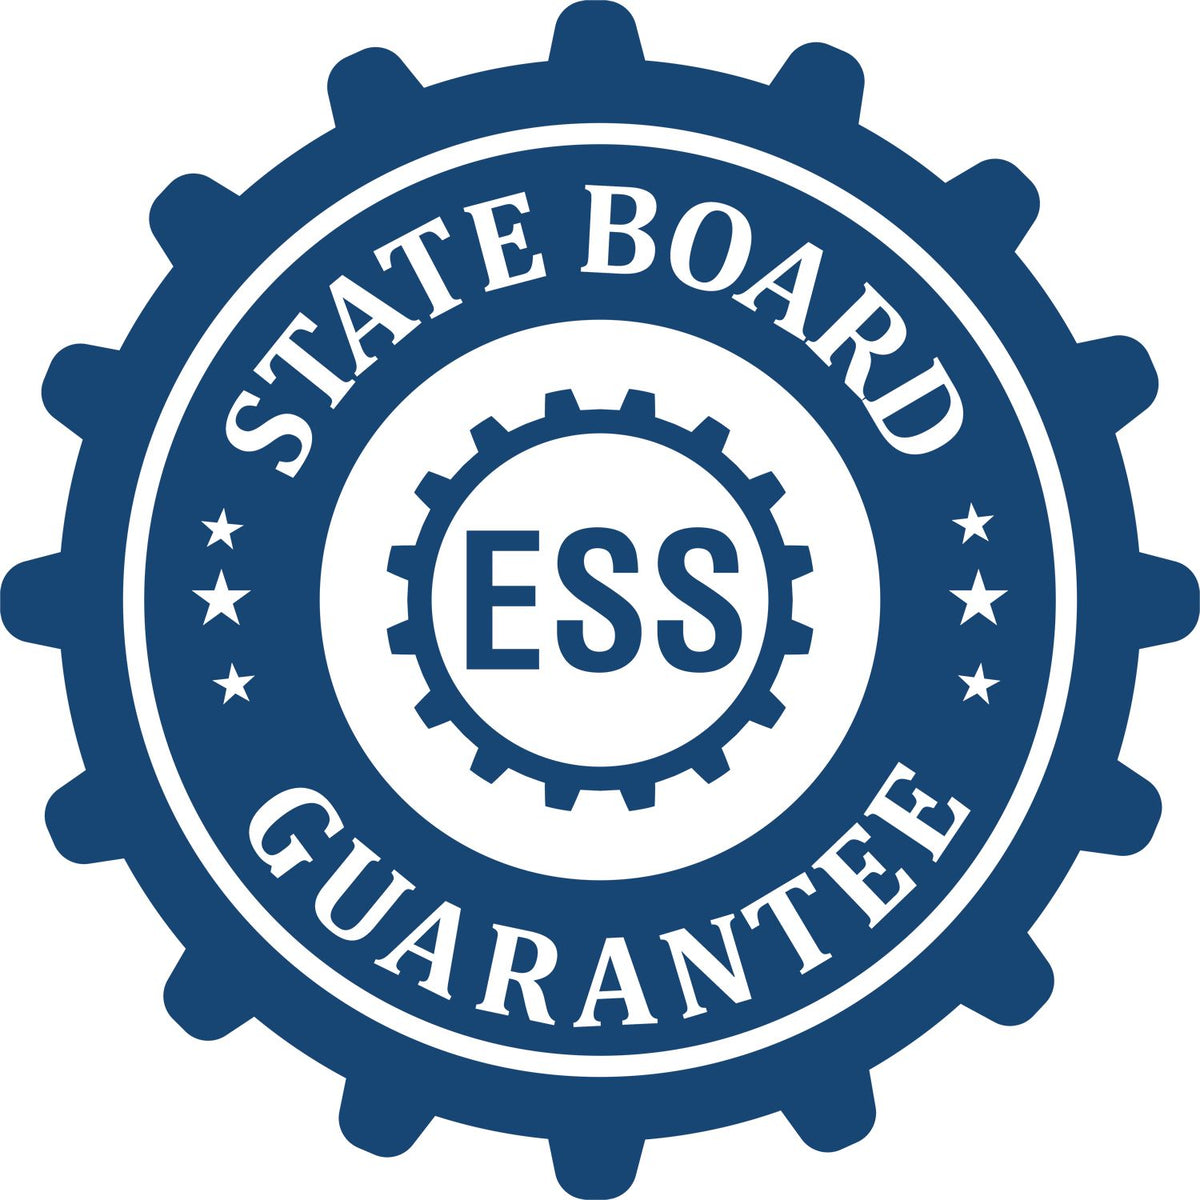 An emblem in a gear shape illustrating a state board guarantee for the Hybrid Minnesota Engineer Seal